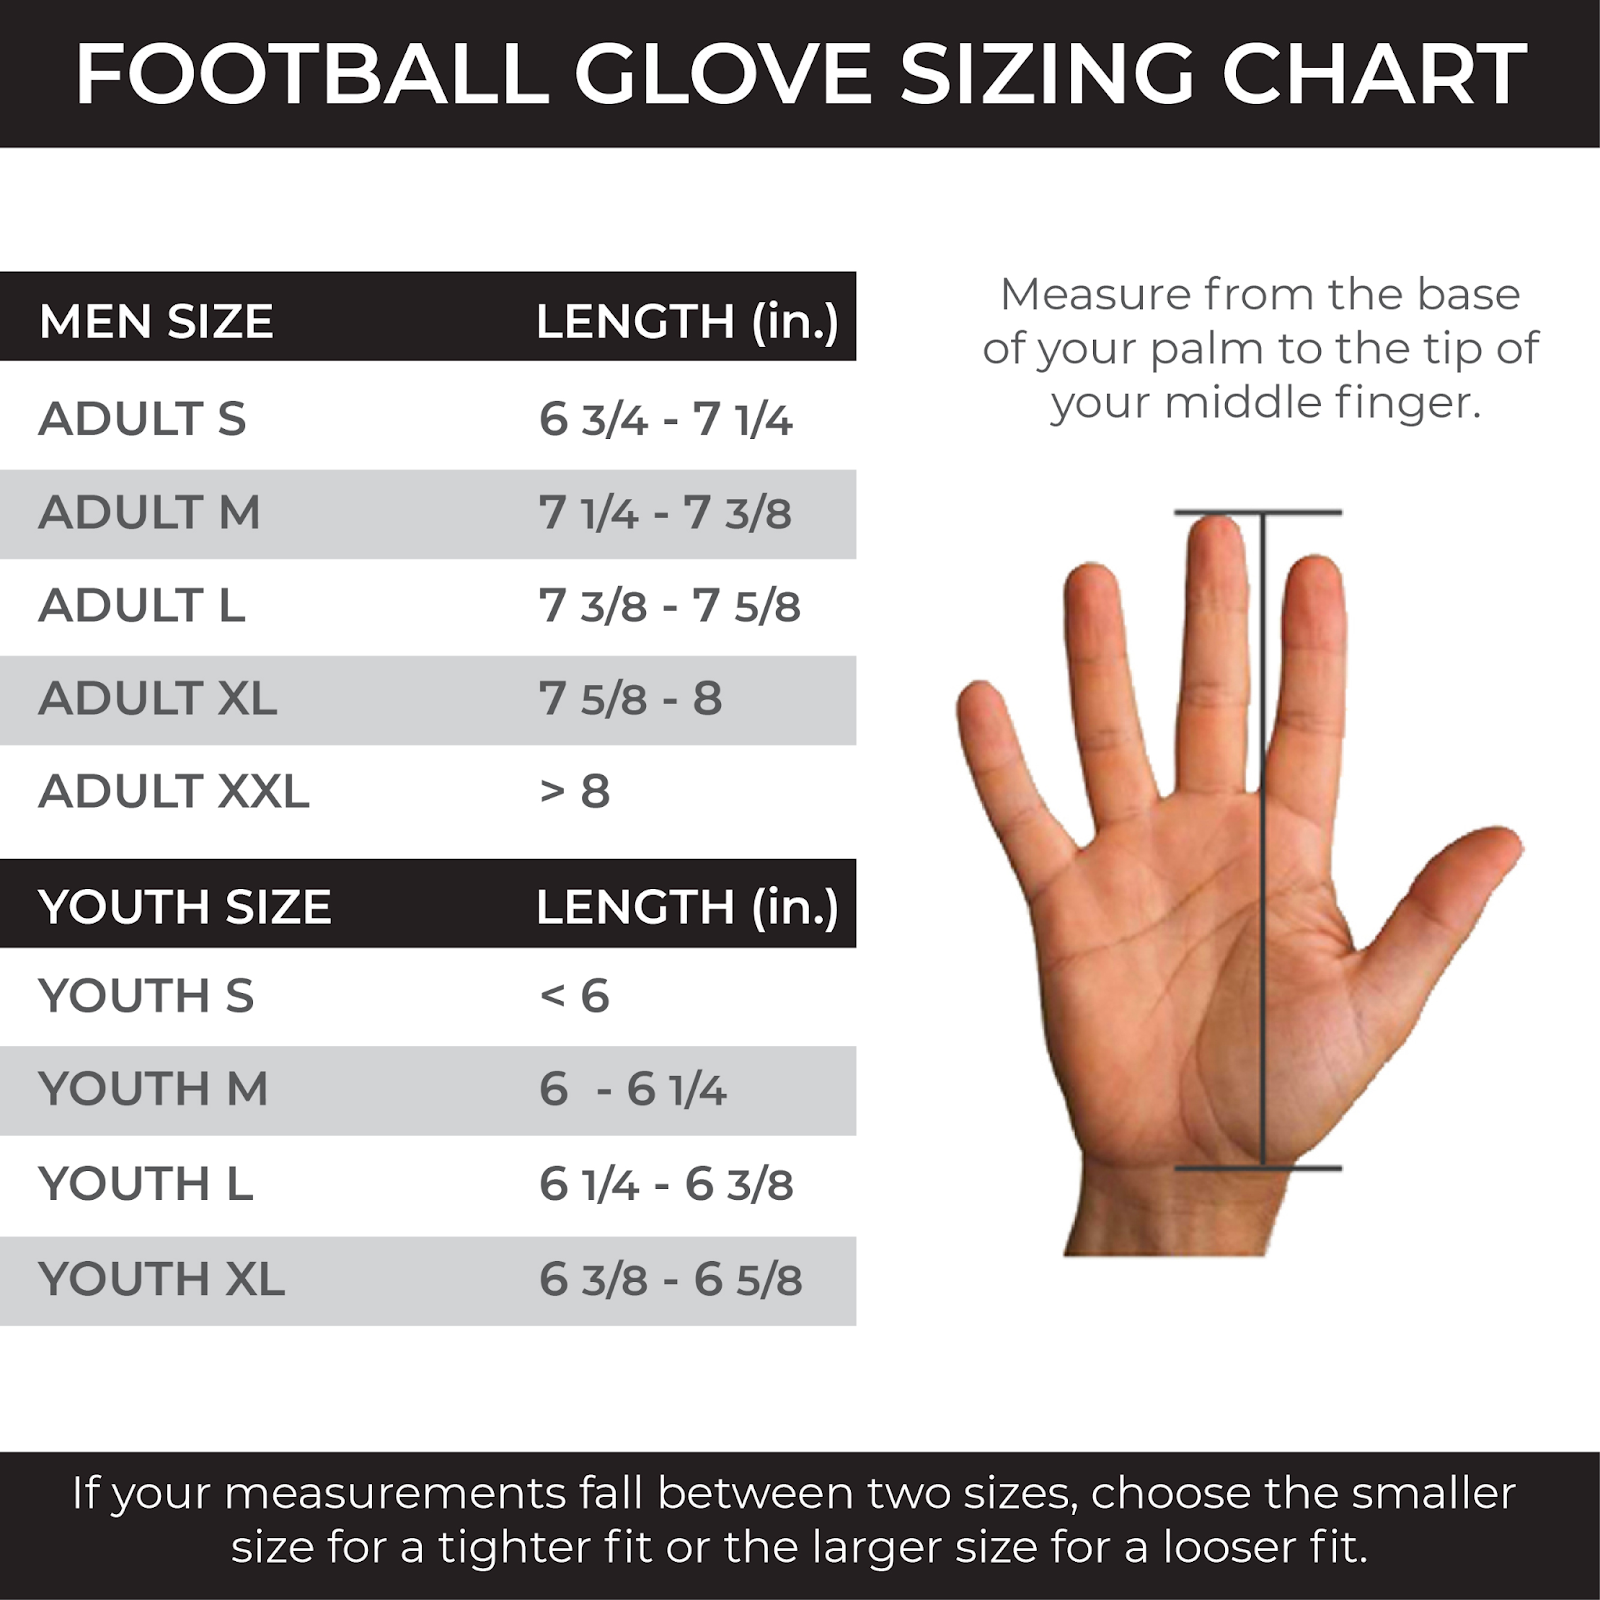 Football glove sizing chart for kids and adults